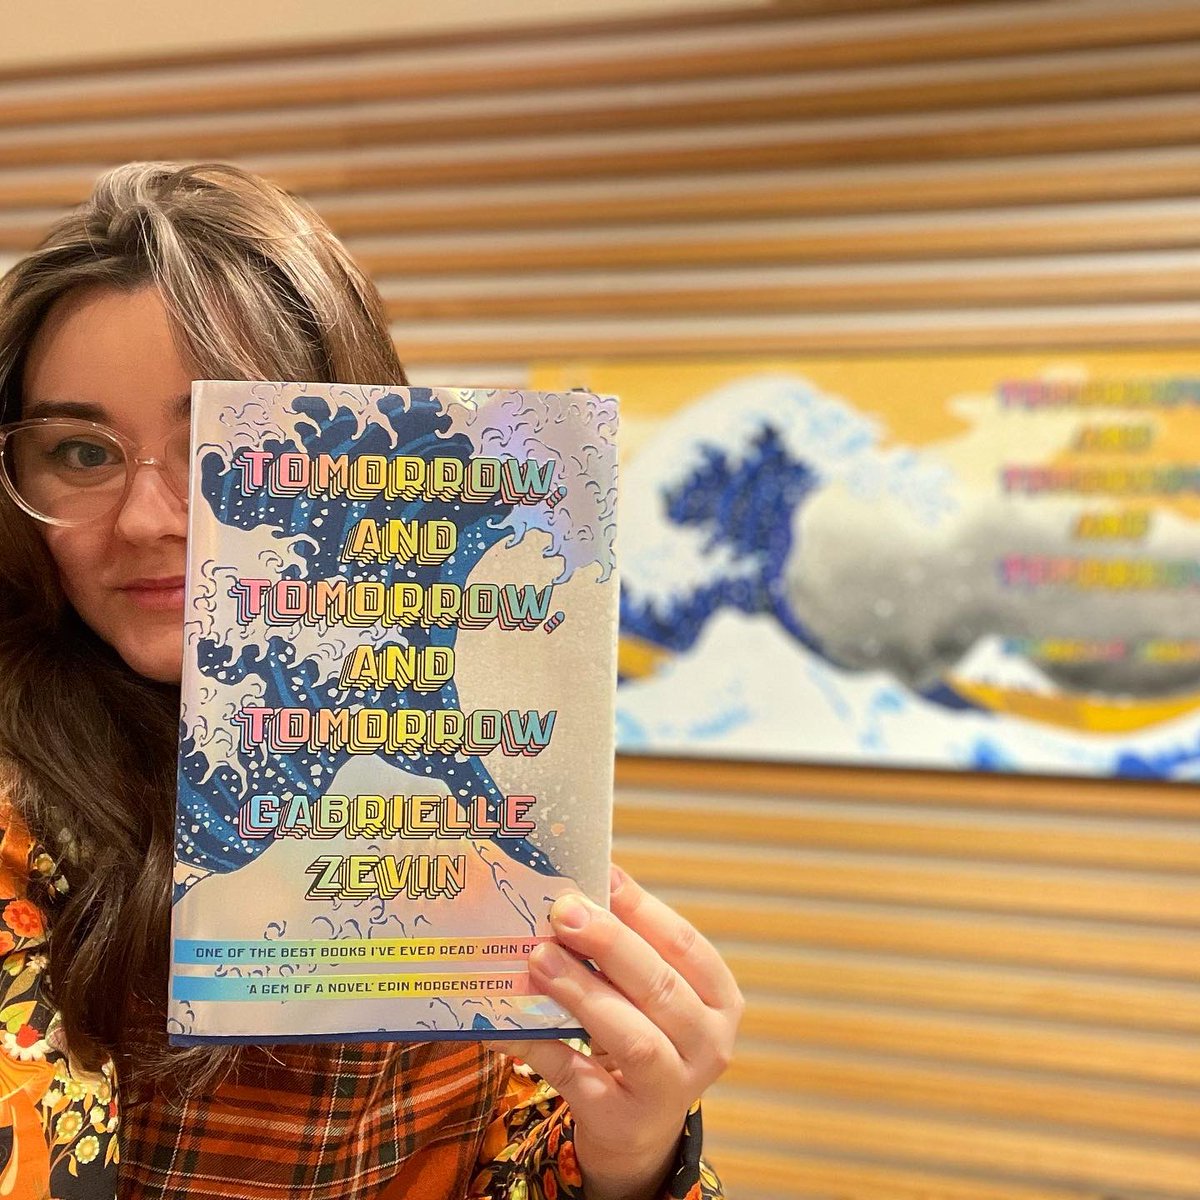 We’re overjoyed to be Day 22 of the @Waterstones Advent Calendar 🎄 Our choice of book was obvious - it could only be the glorious Tomorrow and Tomorrow and Tomorrow by @GabrielleZevin 🌊 #LoveWaterstones